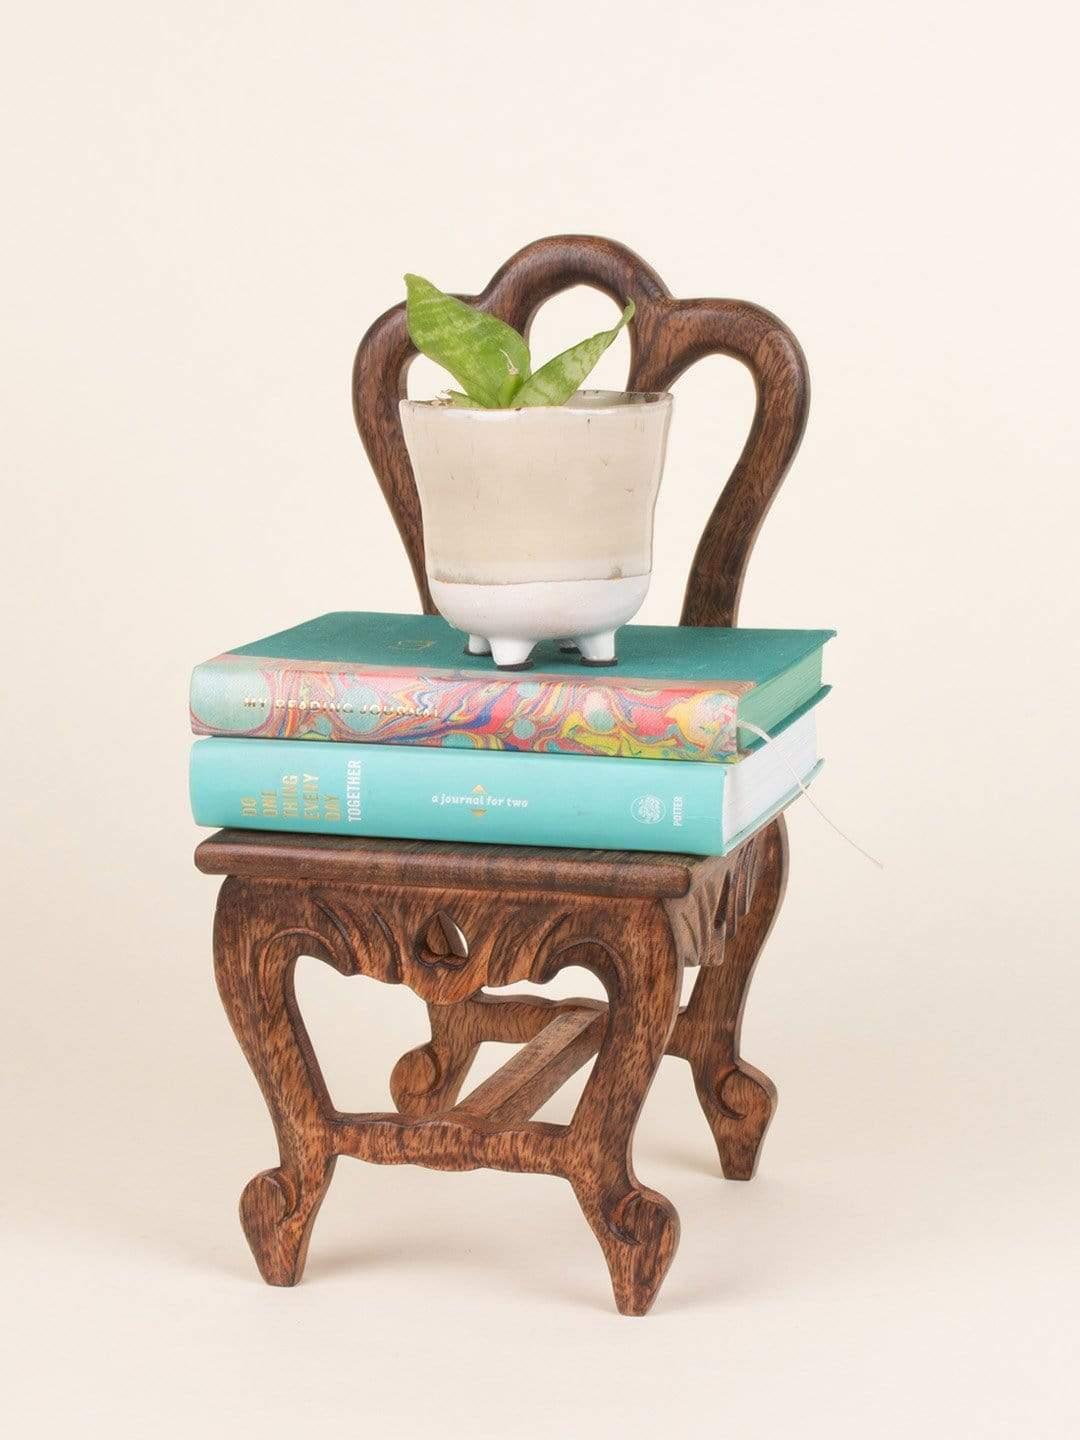 Alice Mini Chair Handcrafted Wooden Wall Shelf - The Wishing Chair